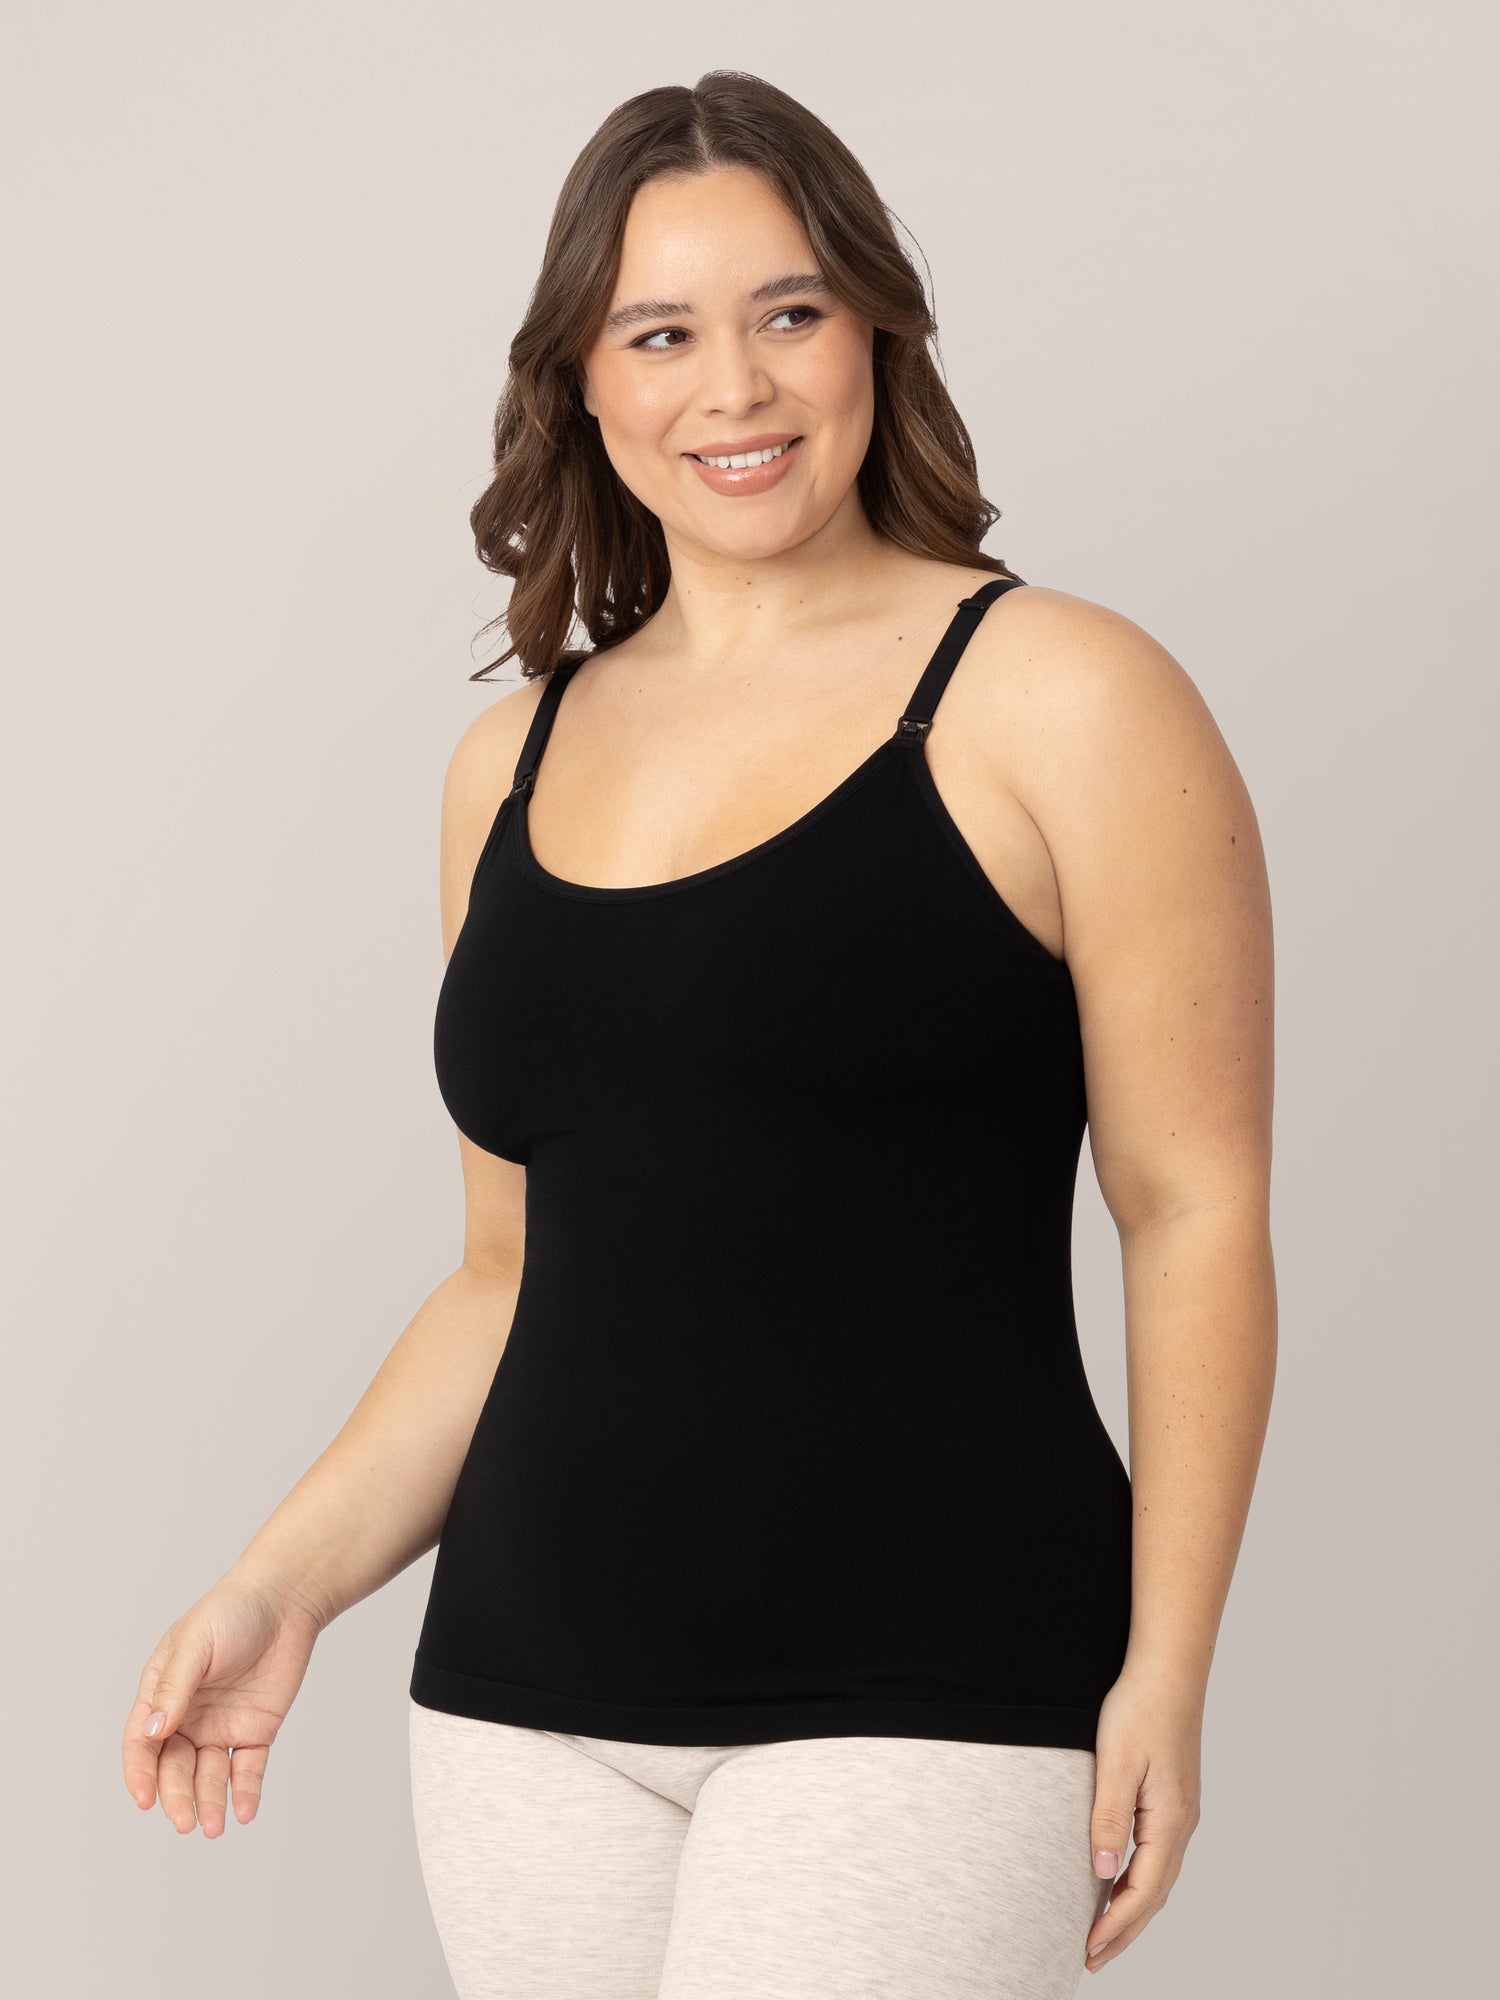 Model turned slightly wearing the Sublime® Bamboo Maternity & Nursing Camisole in Black